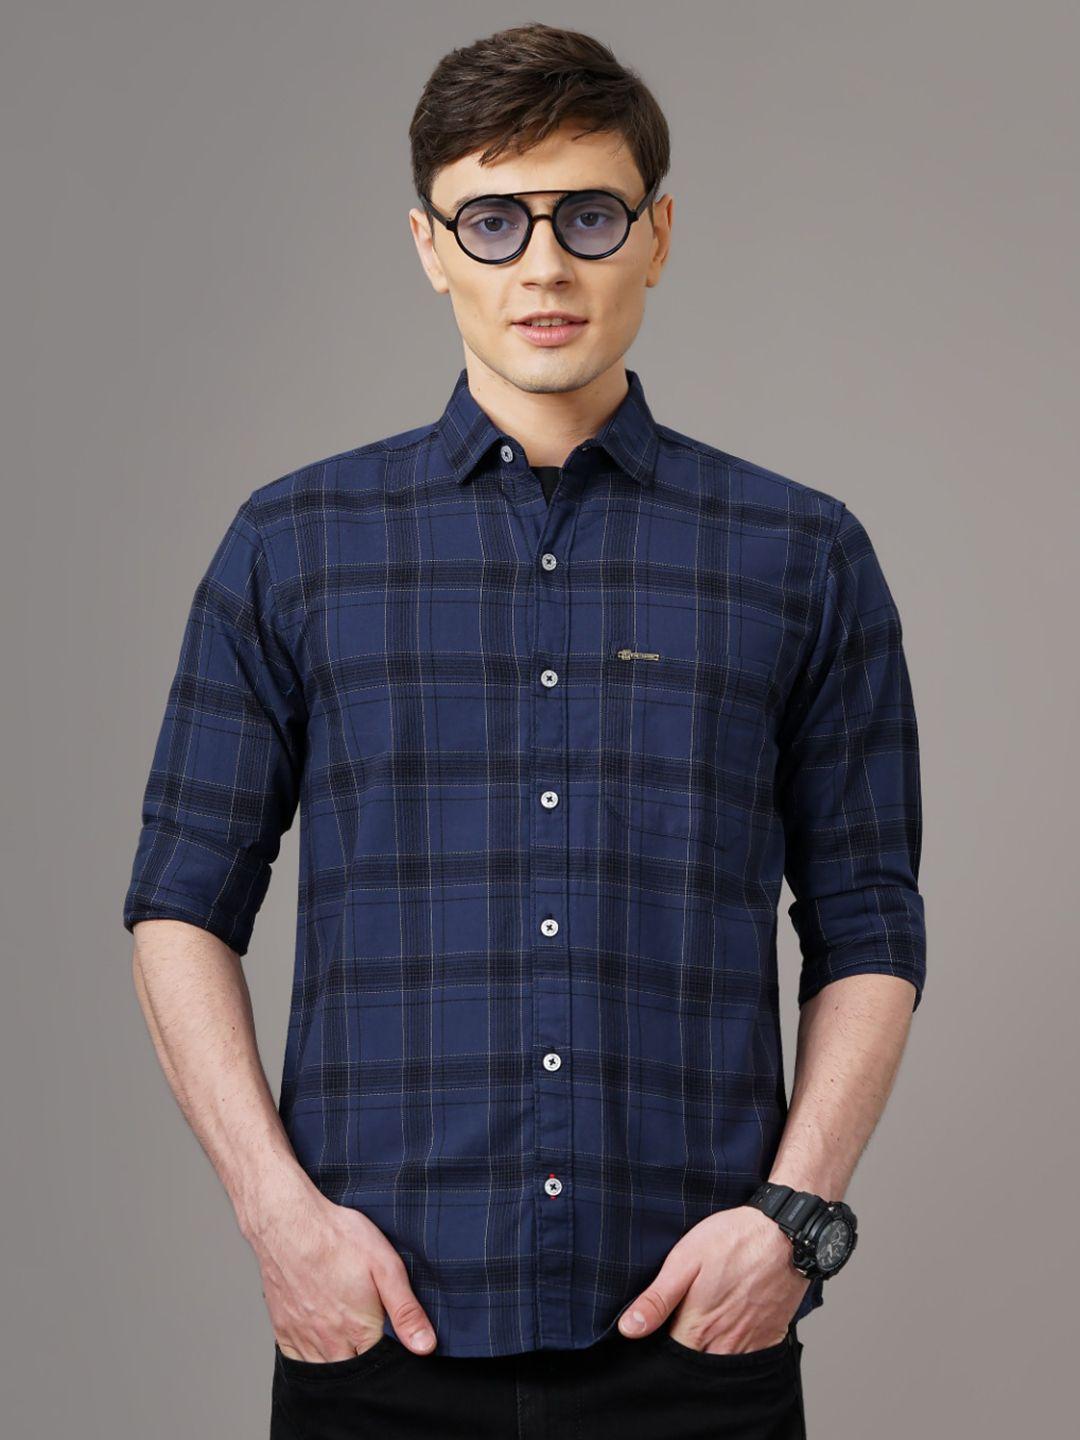 paul-street-standard-slim-fit-checked-cotton-casual-shirt